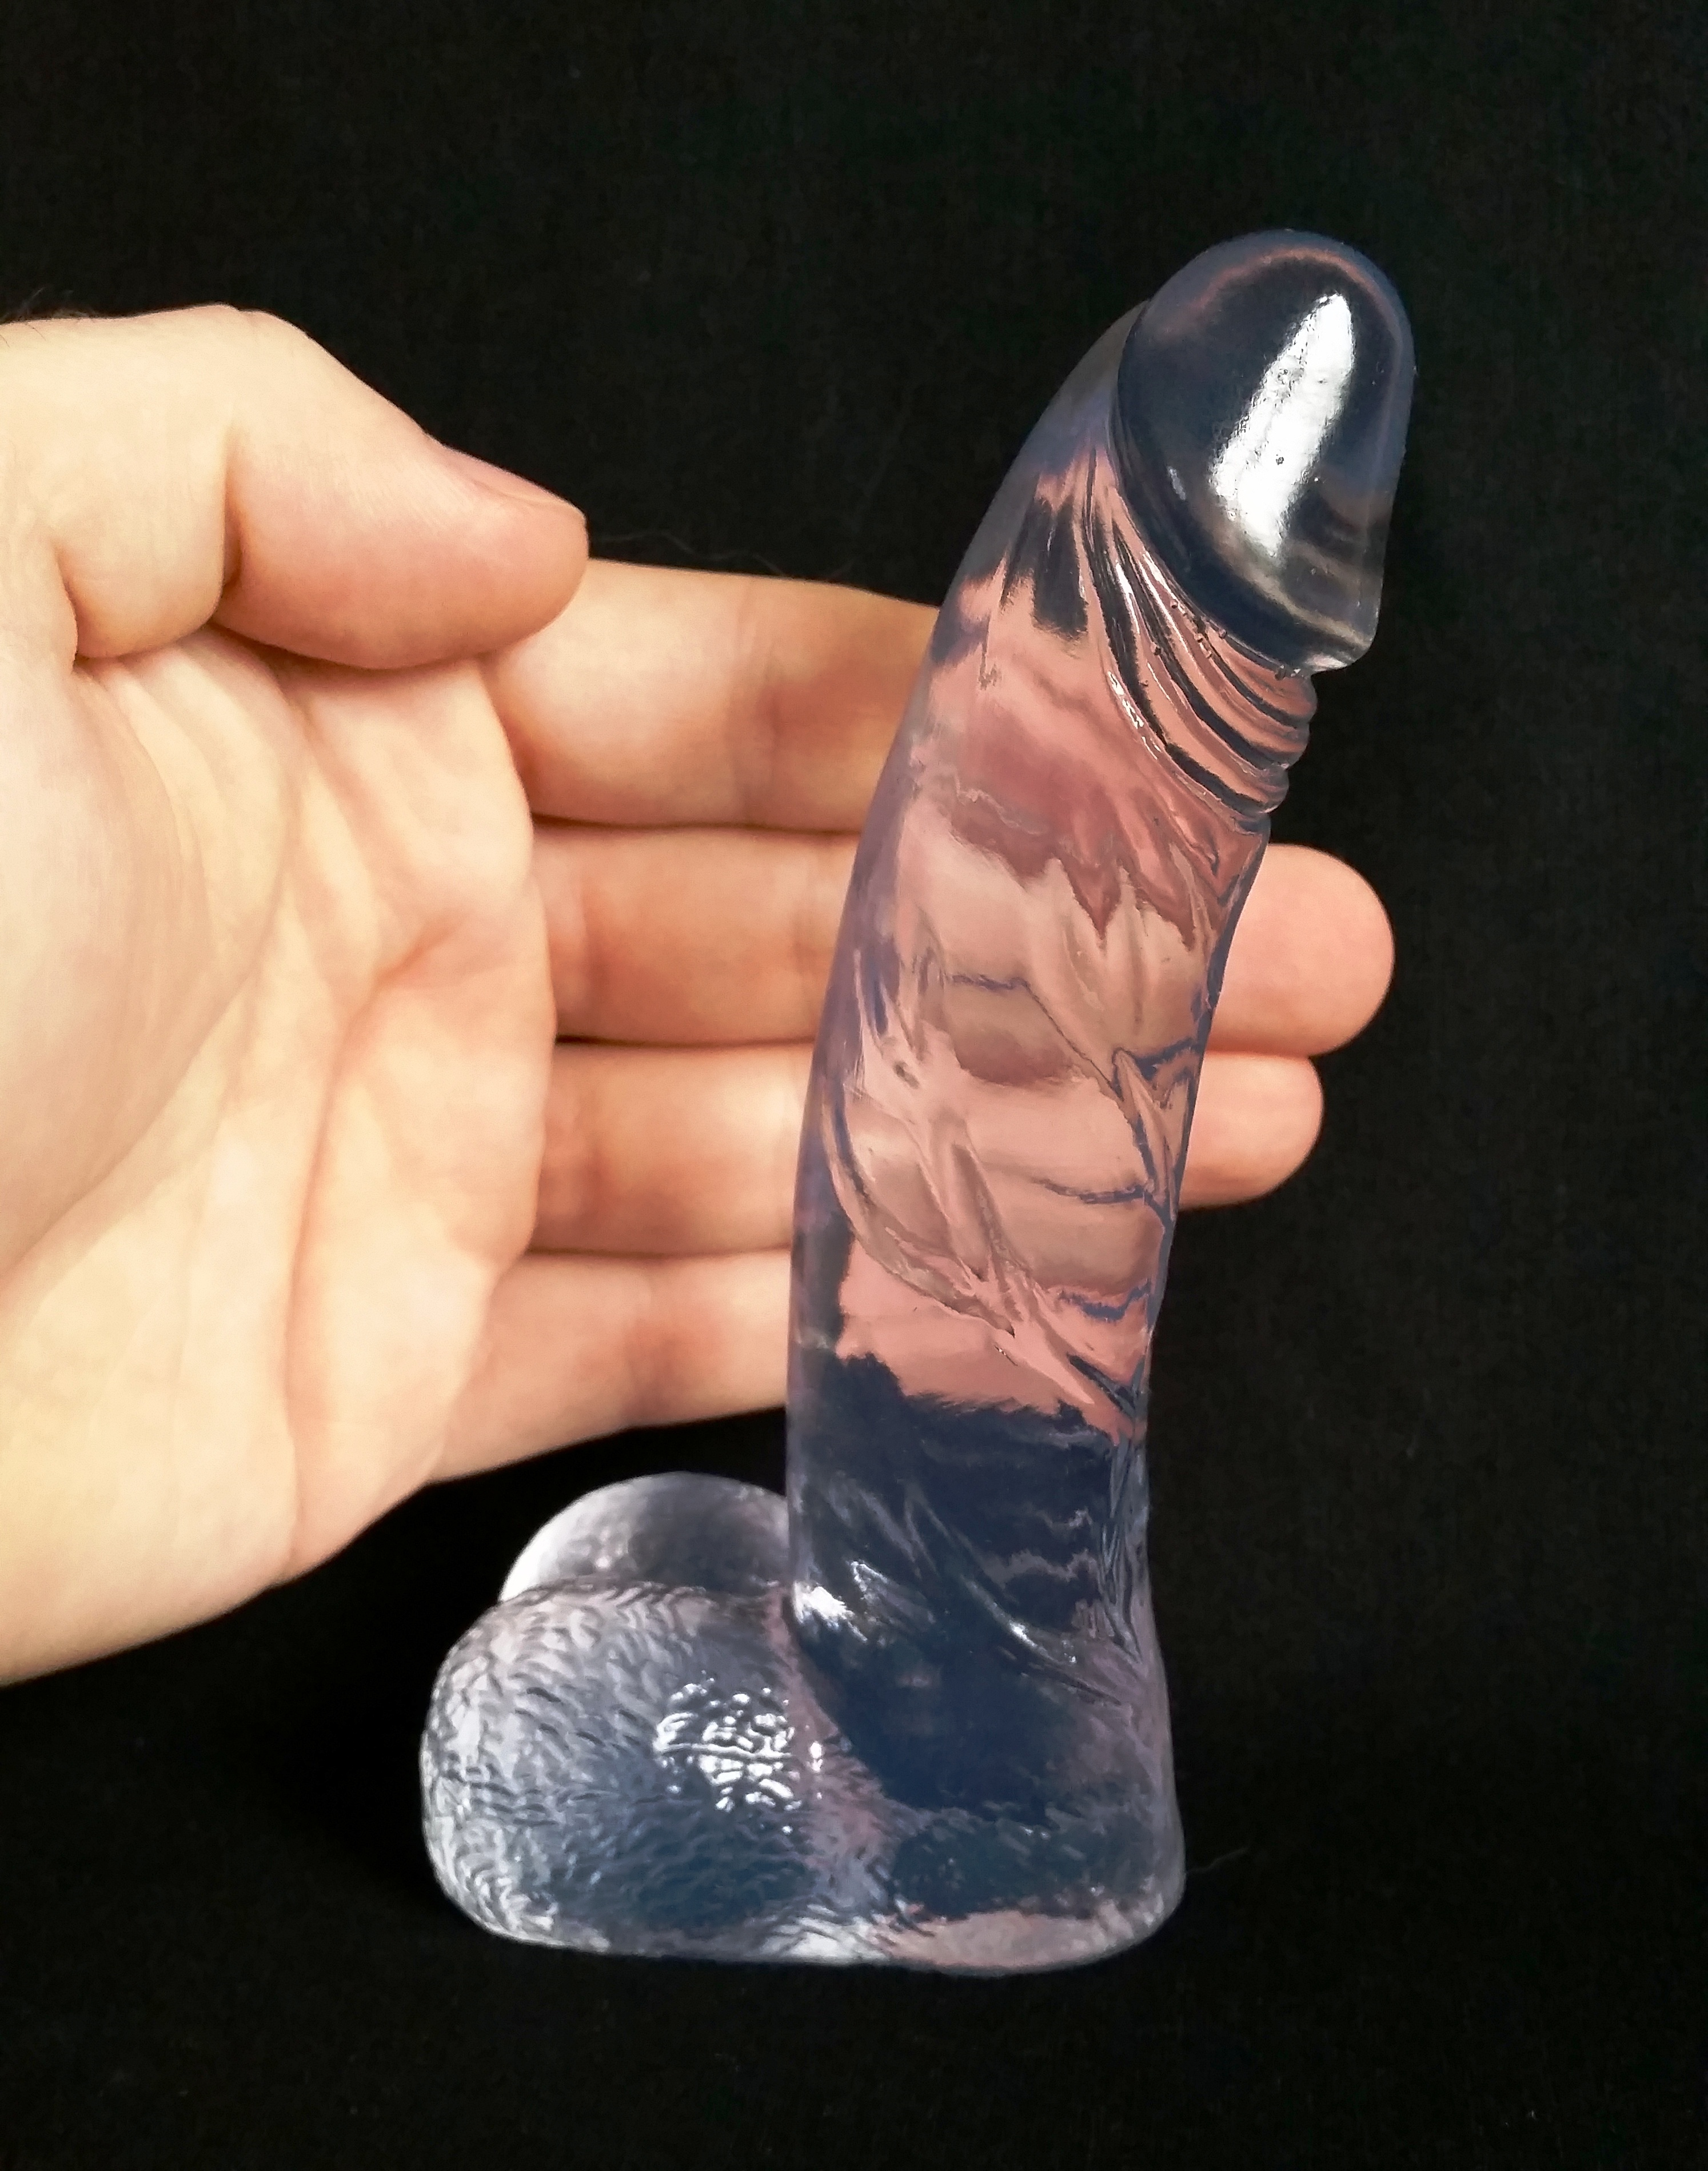 Howto use anal dildo